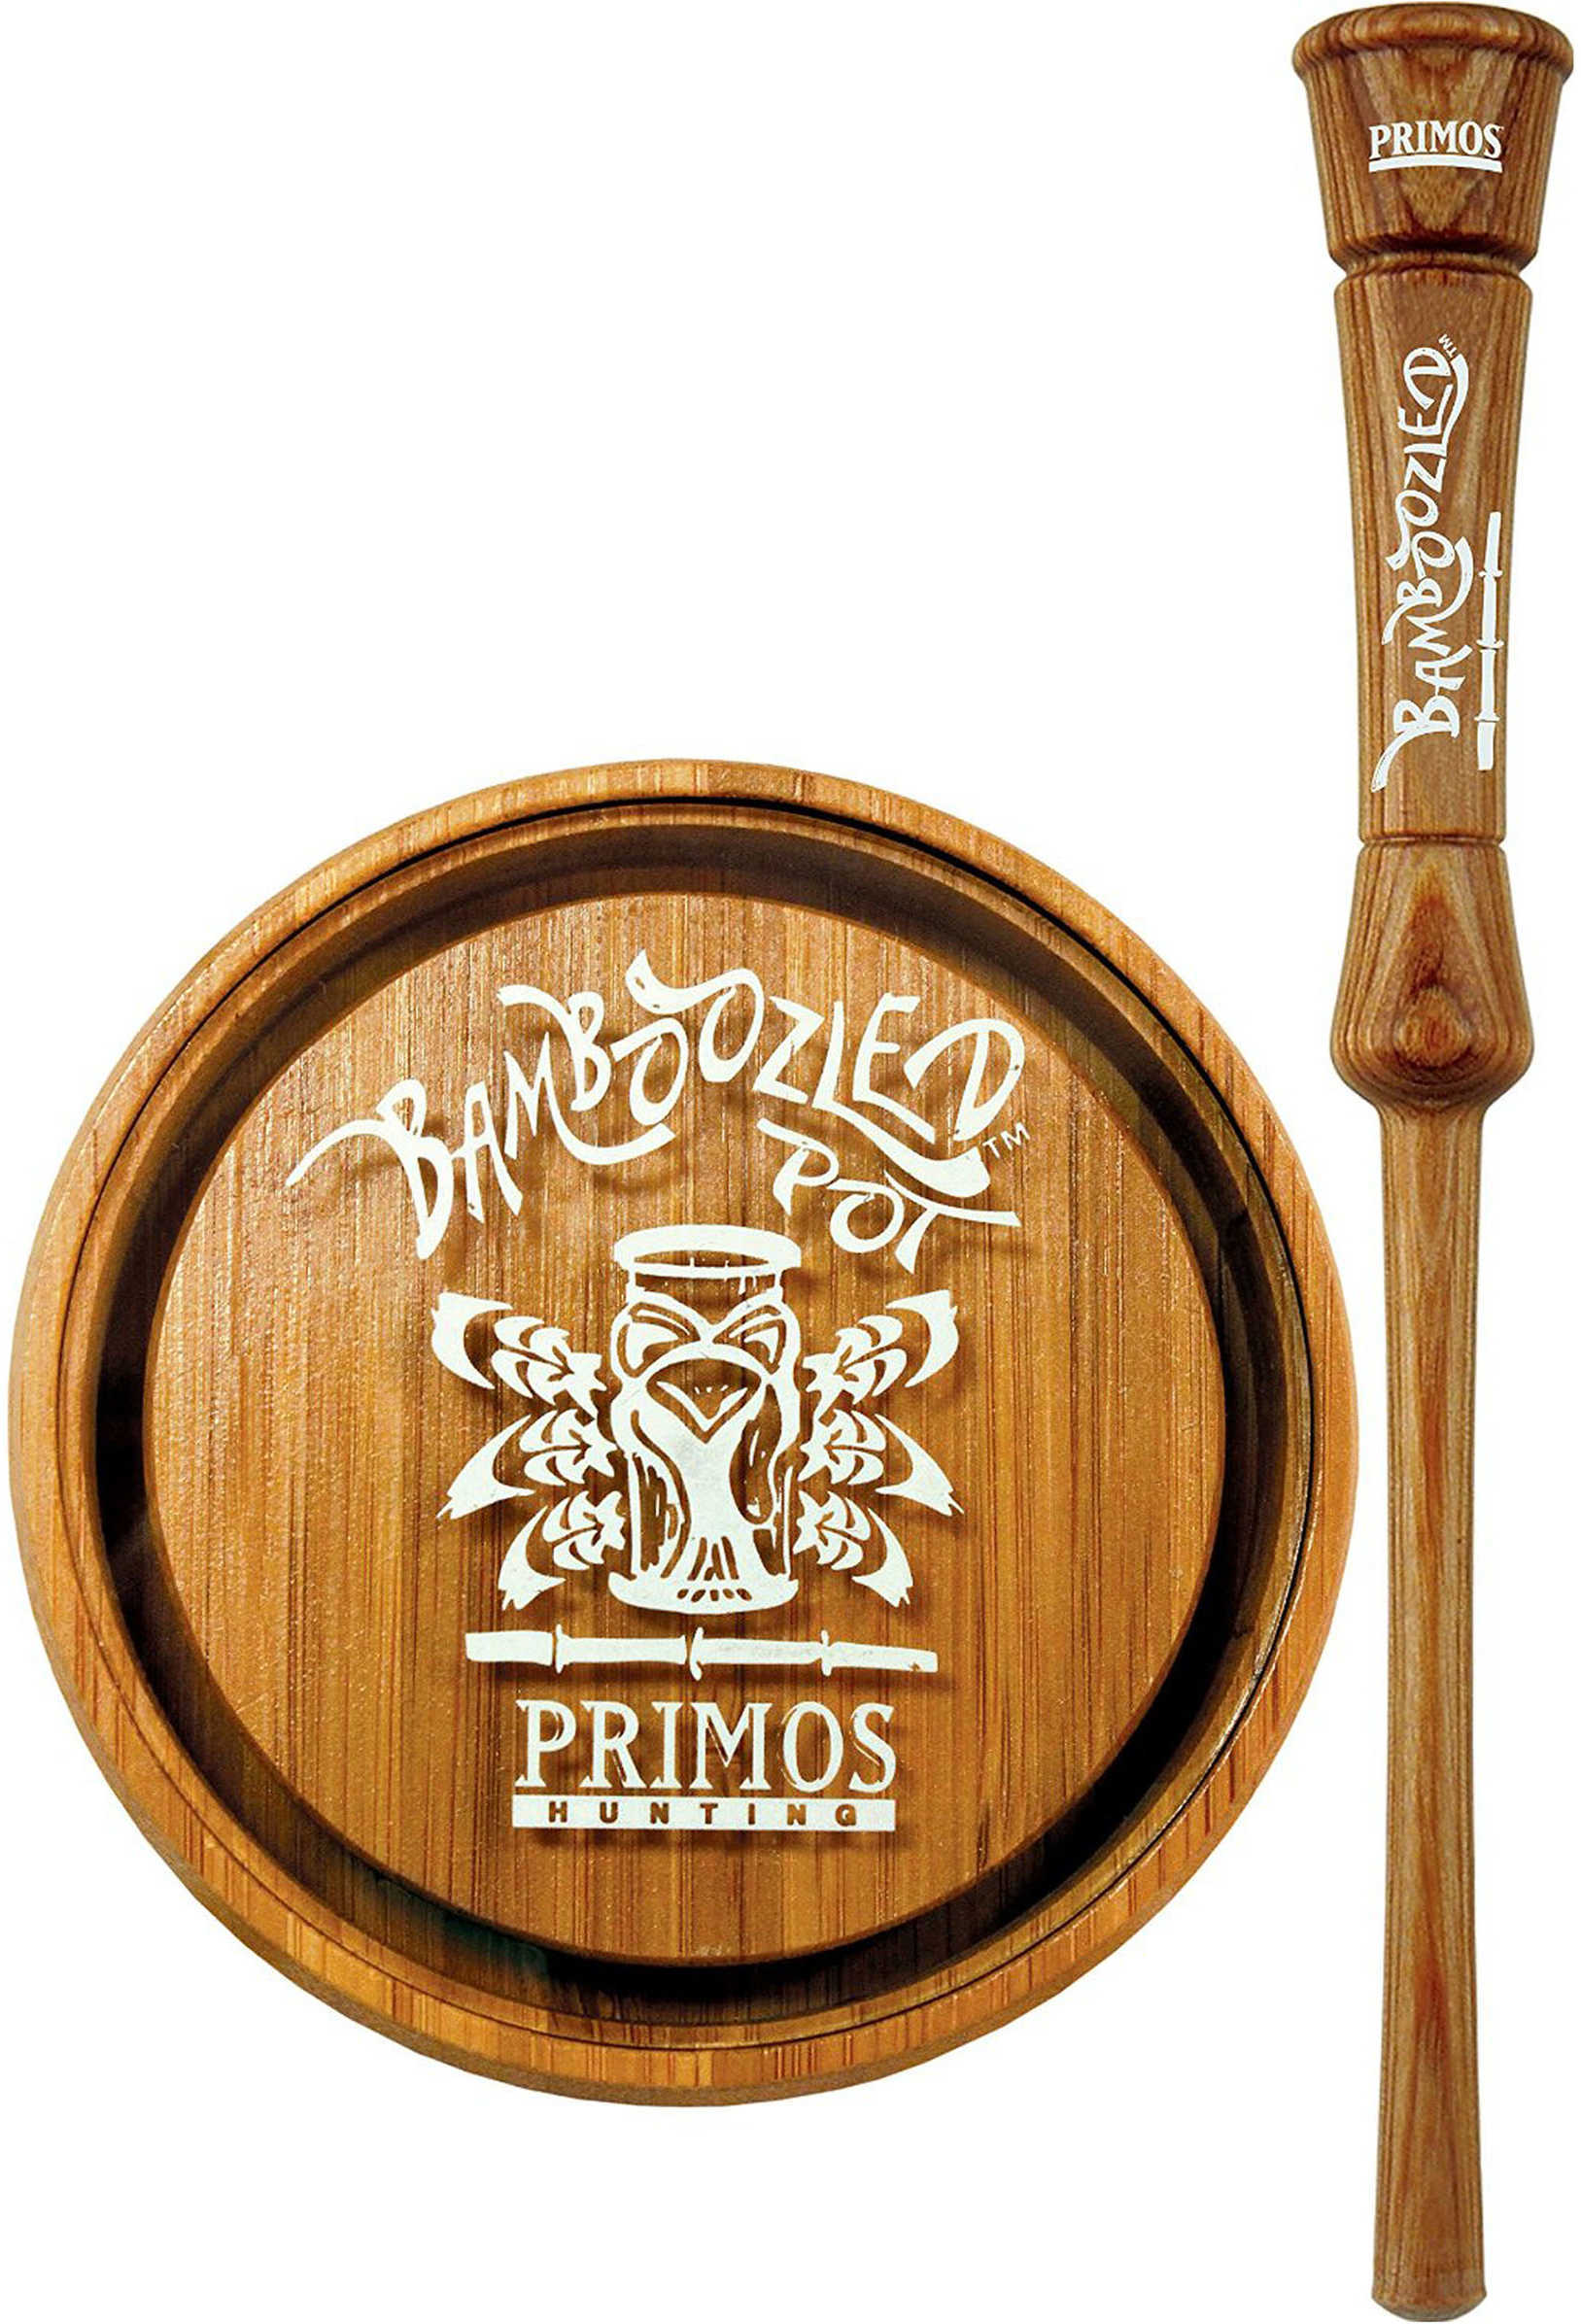 Primos Friction Call, Turkey Bamboozled Pot, Trap Md: 241